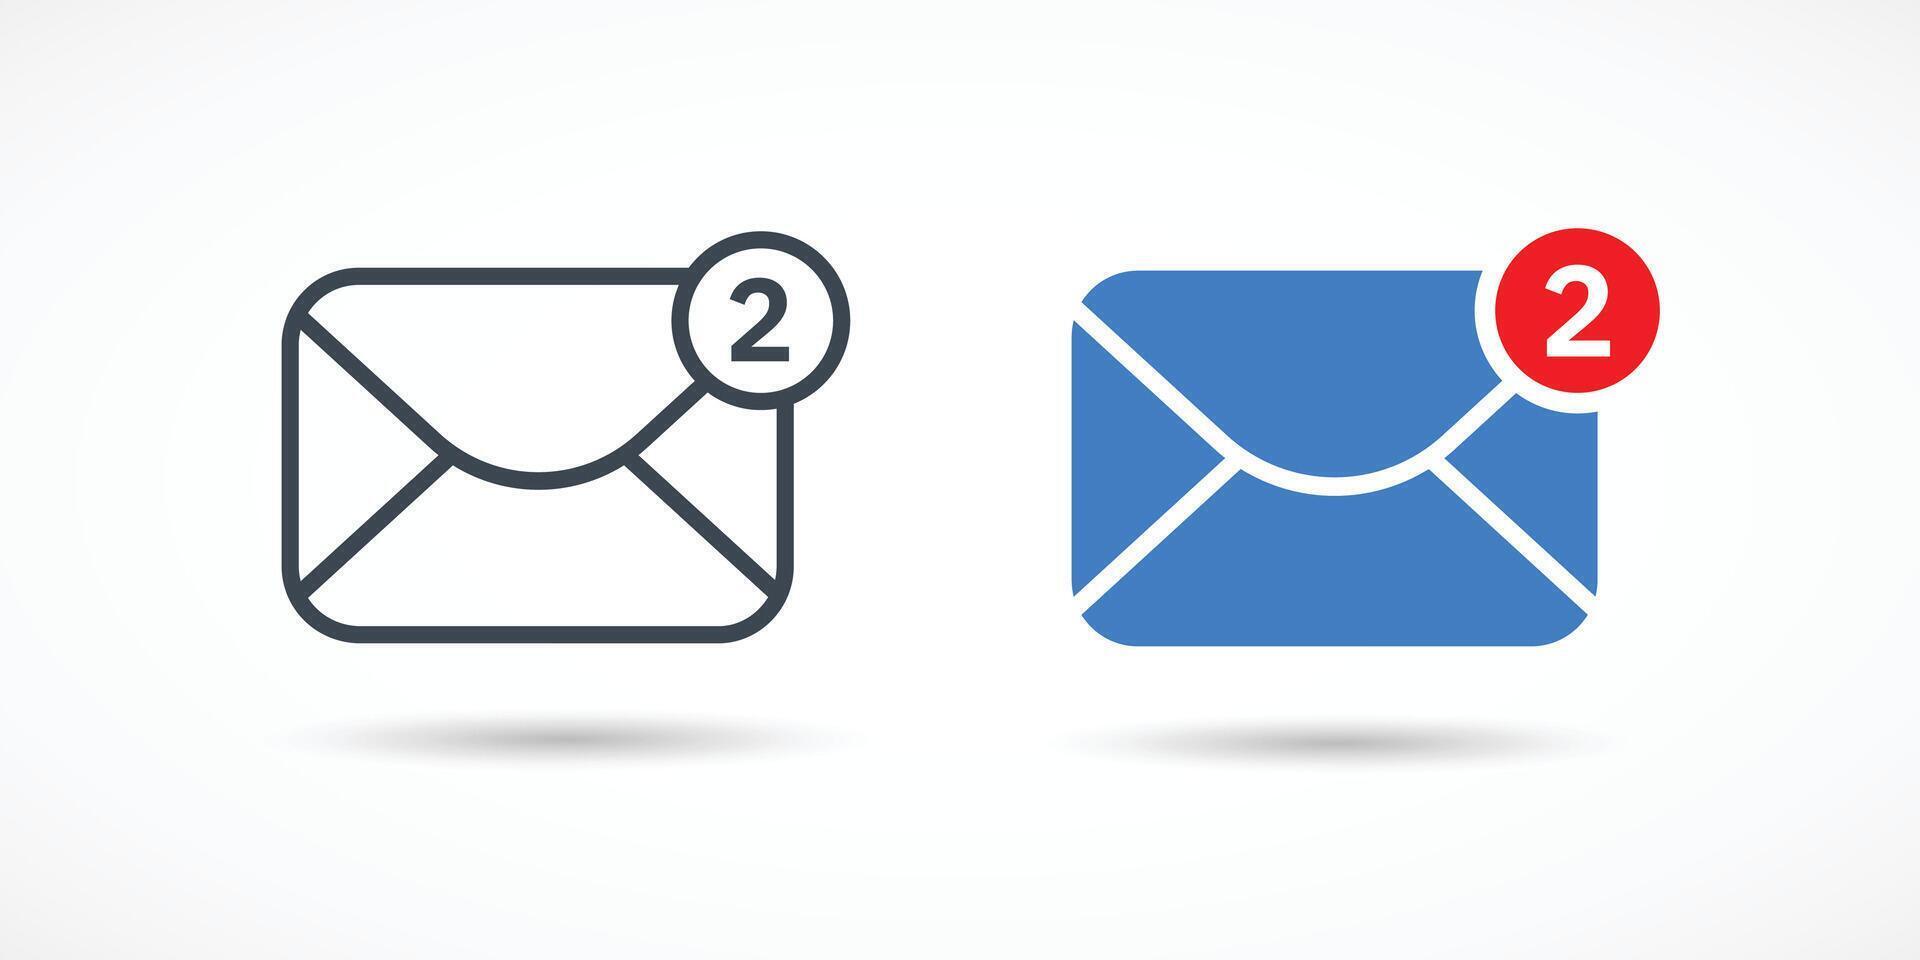 Two new incoming message envelope with notification, vector icons set.